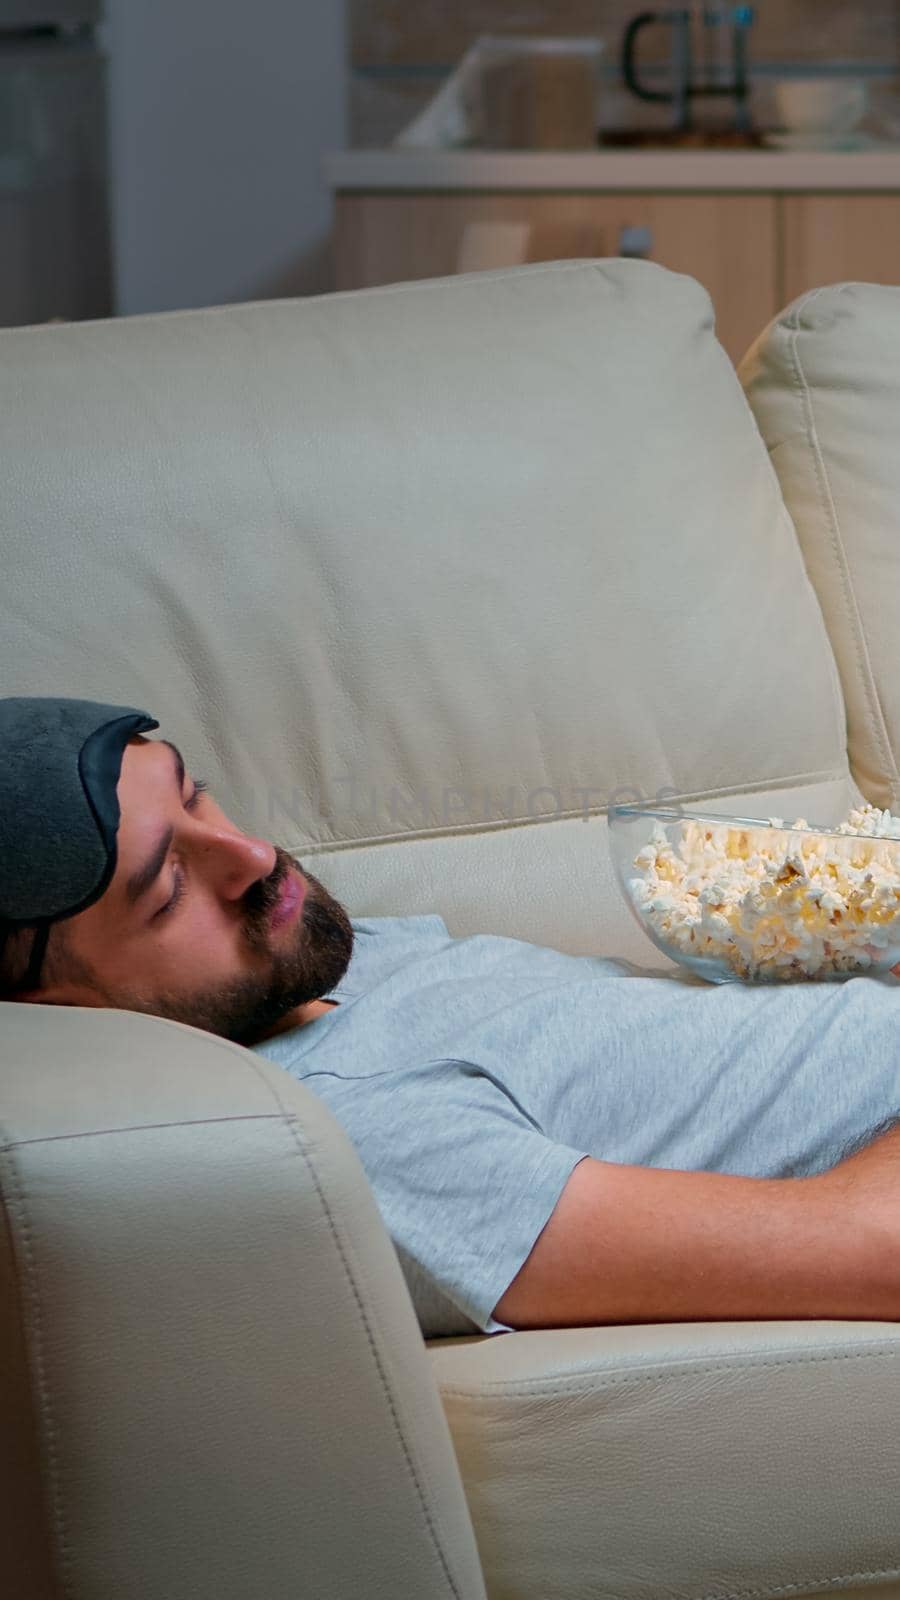 Man closing his eye and falling asleep on the couch in living room in front of the TV, while the television entertainment is ON. Relaxation cinema after a hard week of work